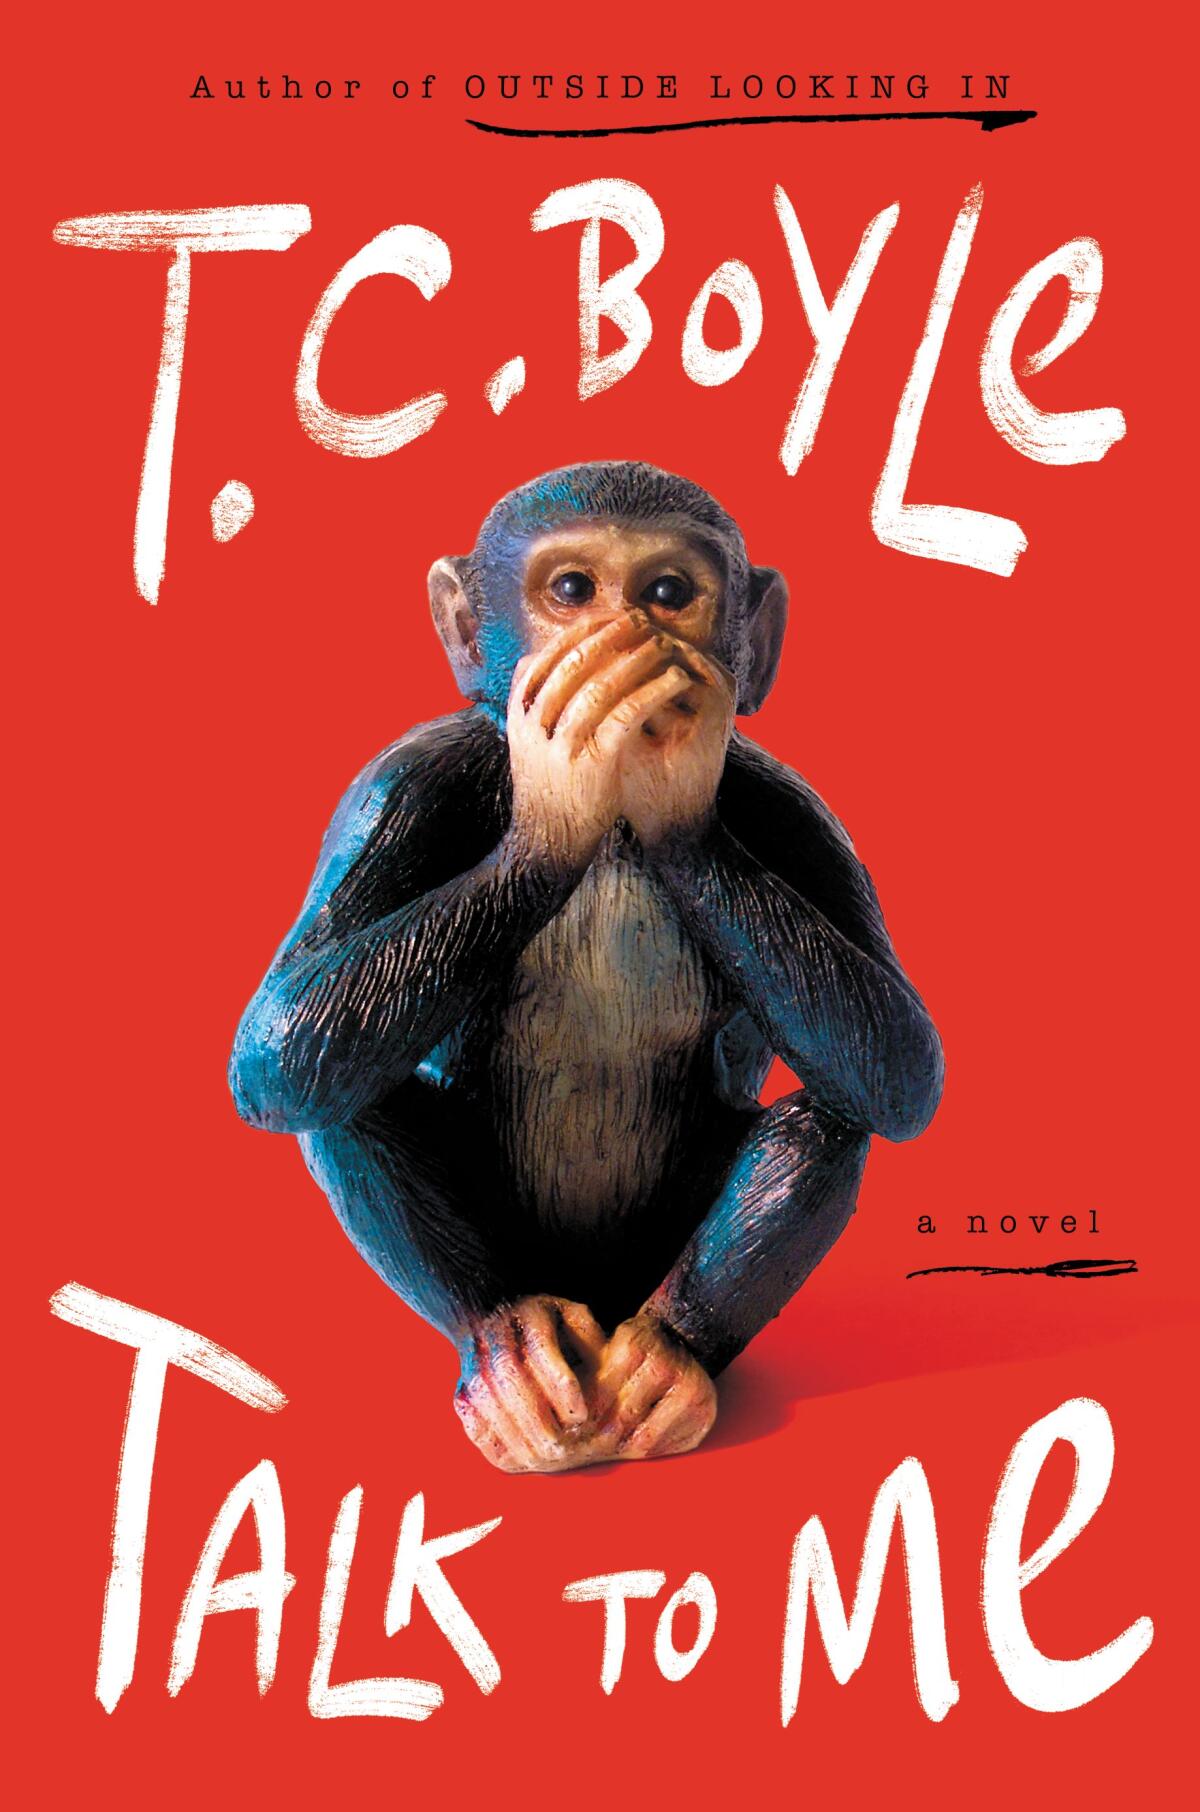 "Talk to Me," by T.C. Boyle